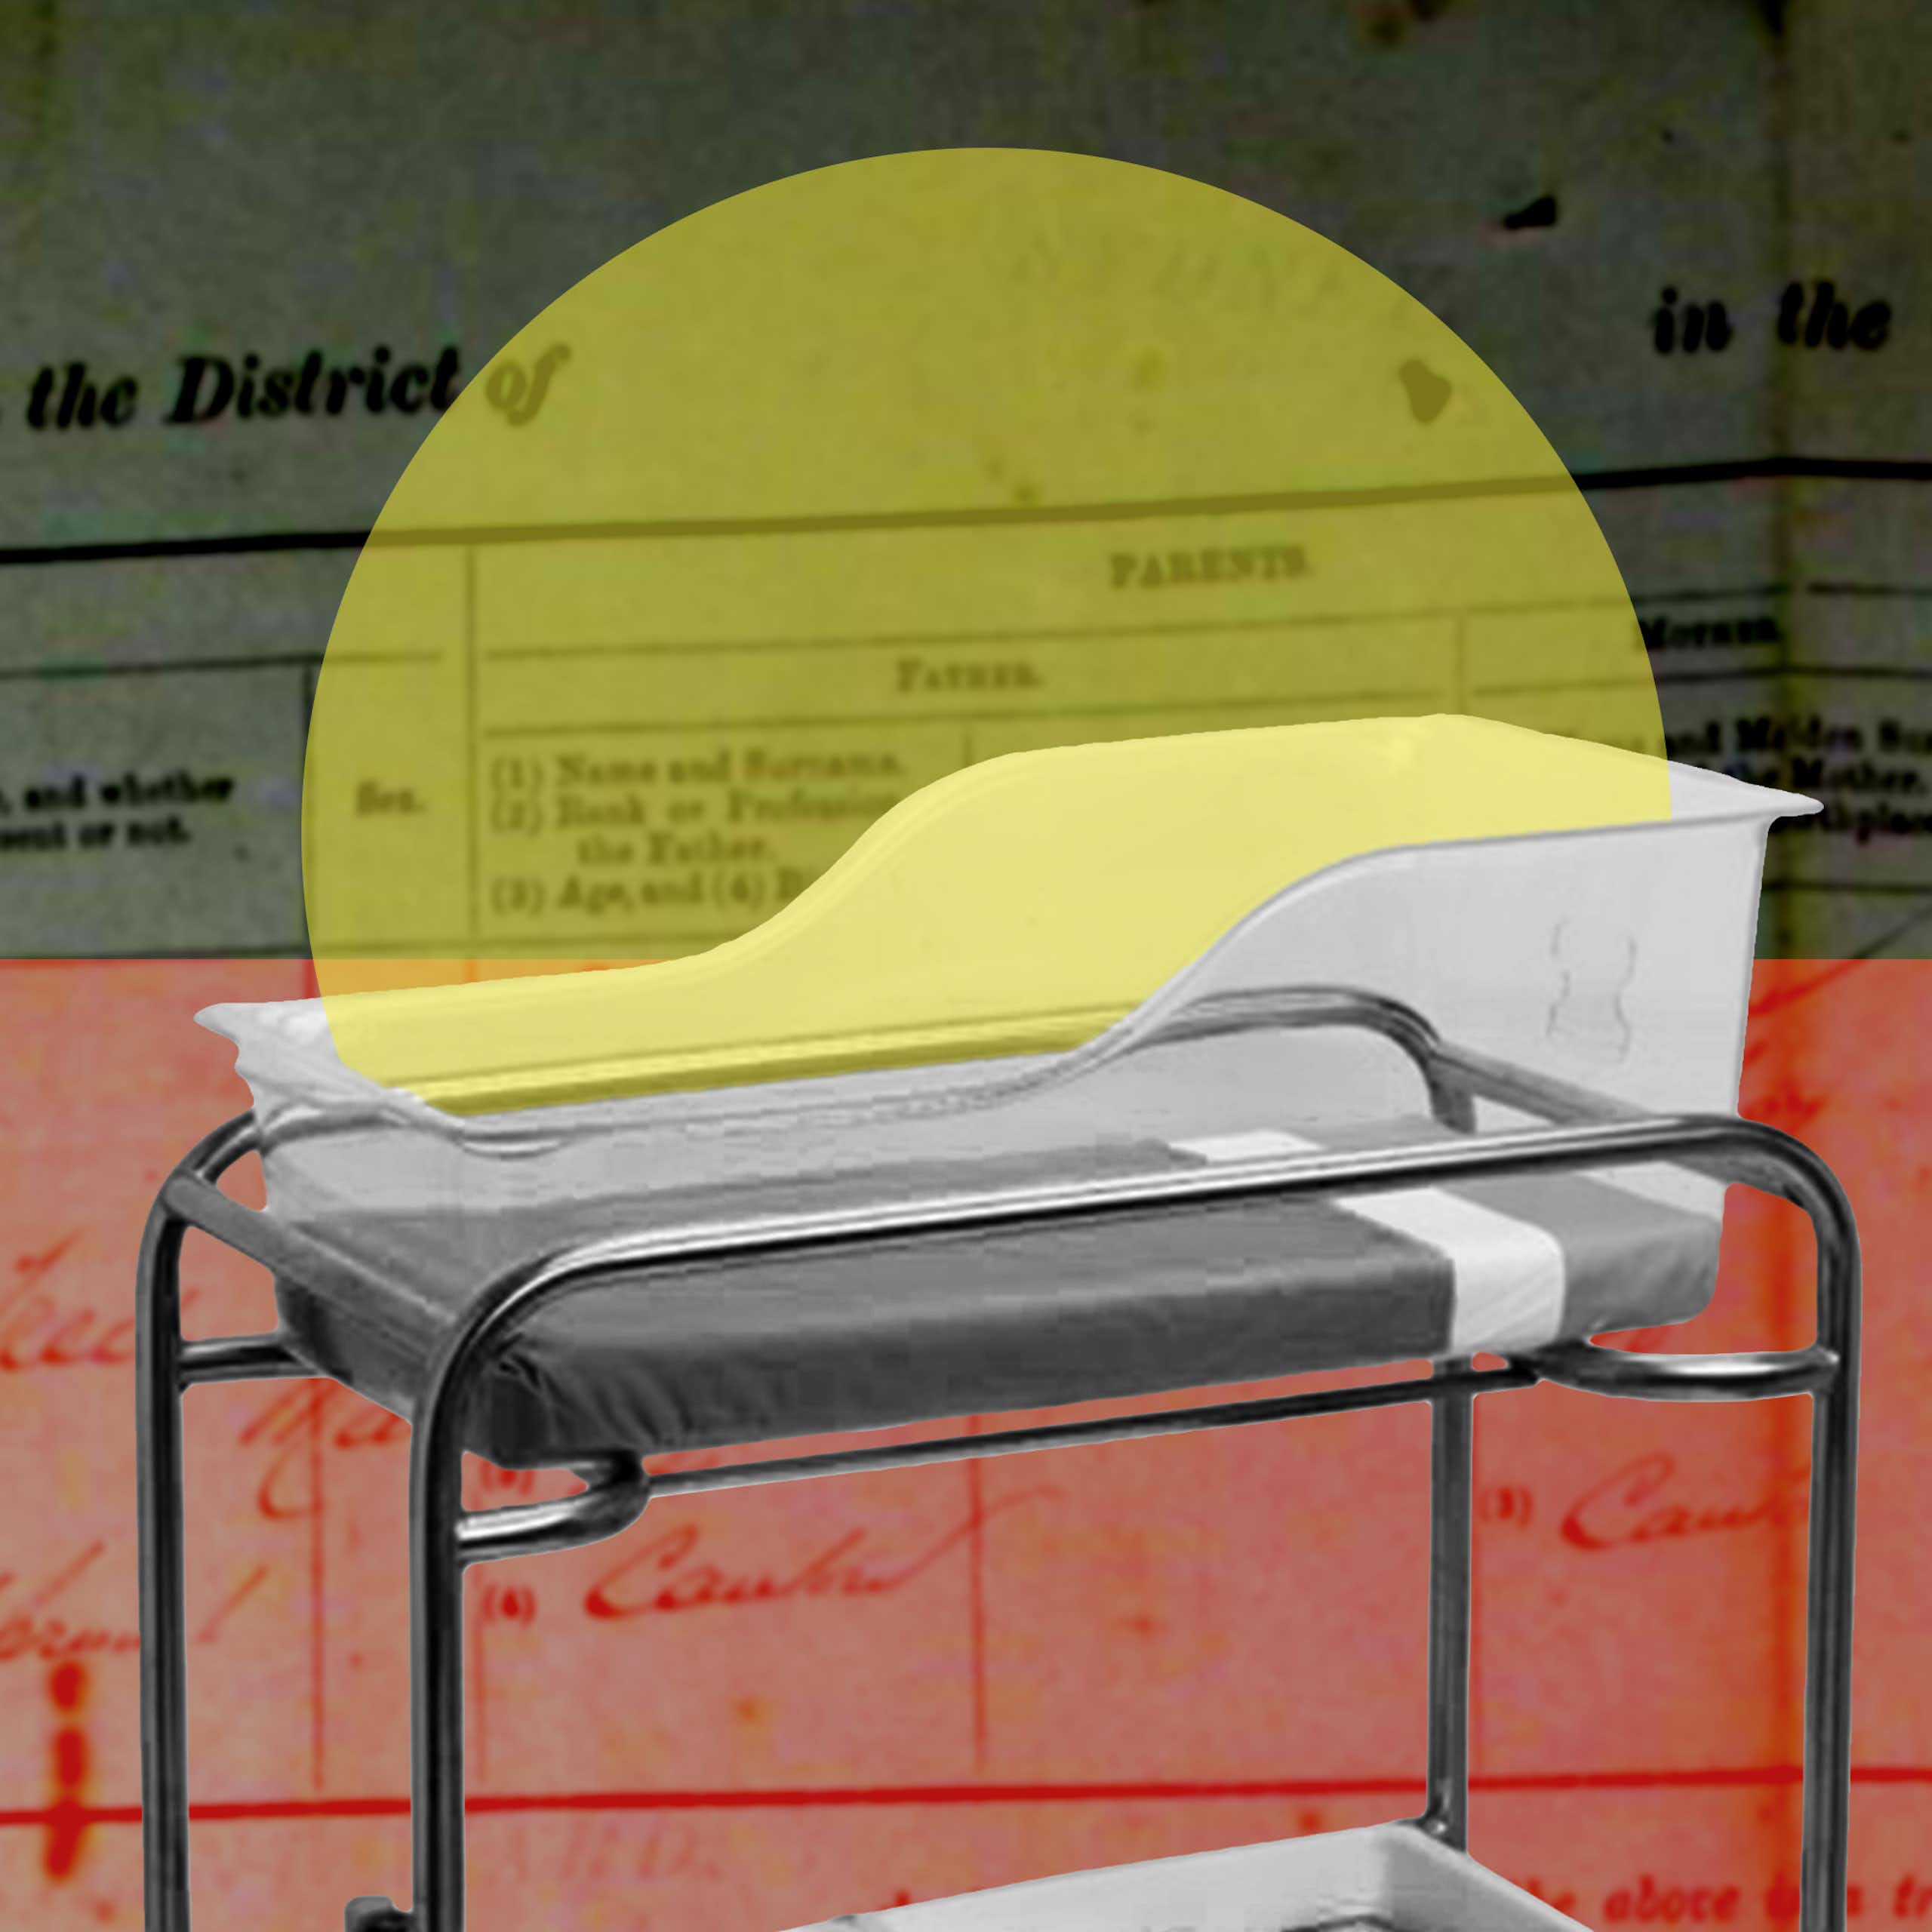 The Indigenous flag superimposed over a black and white image of a hospital baby cot, with an old birth form in the background